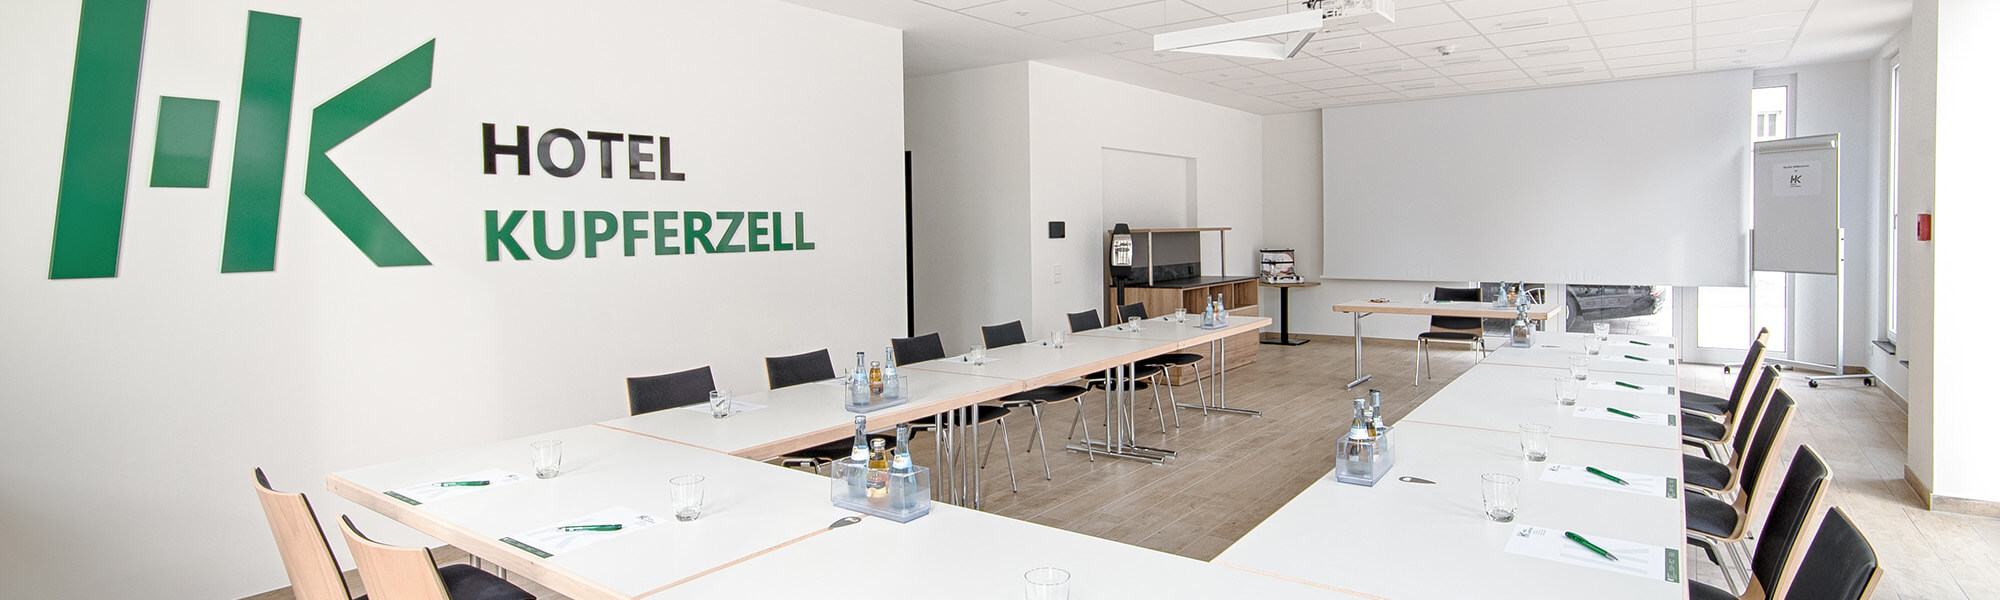 Conferences and overnight stays in Hotel Kupferzell